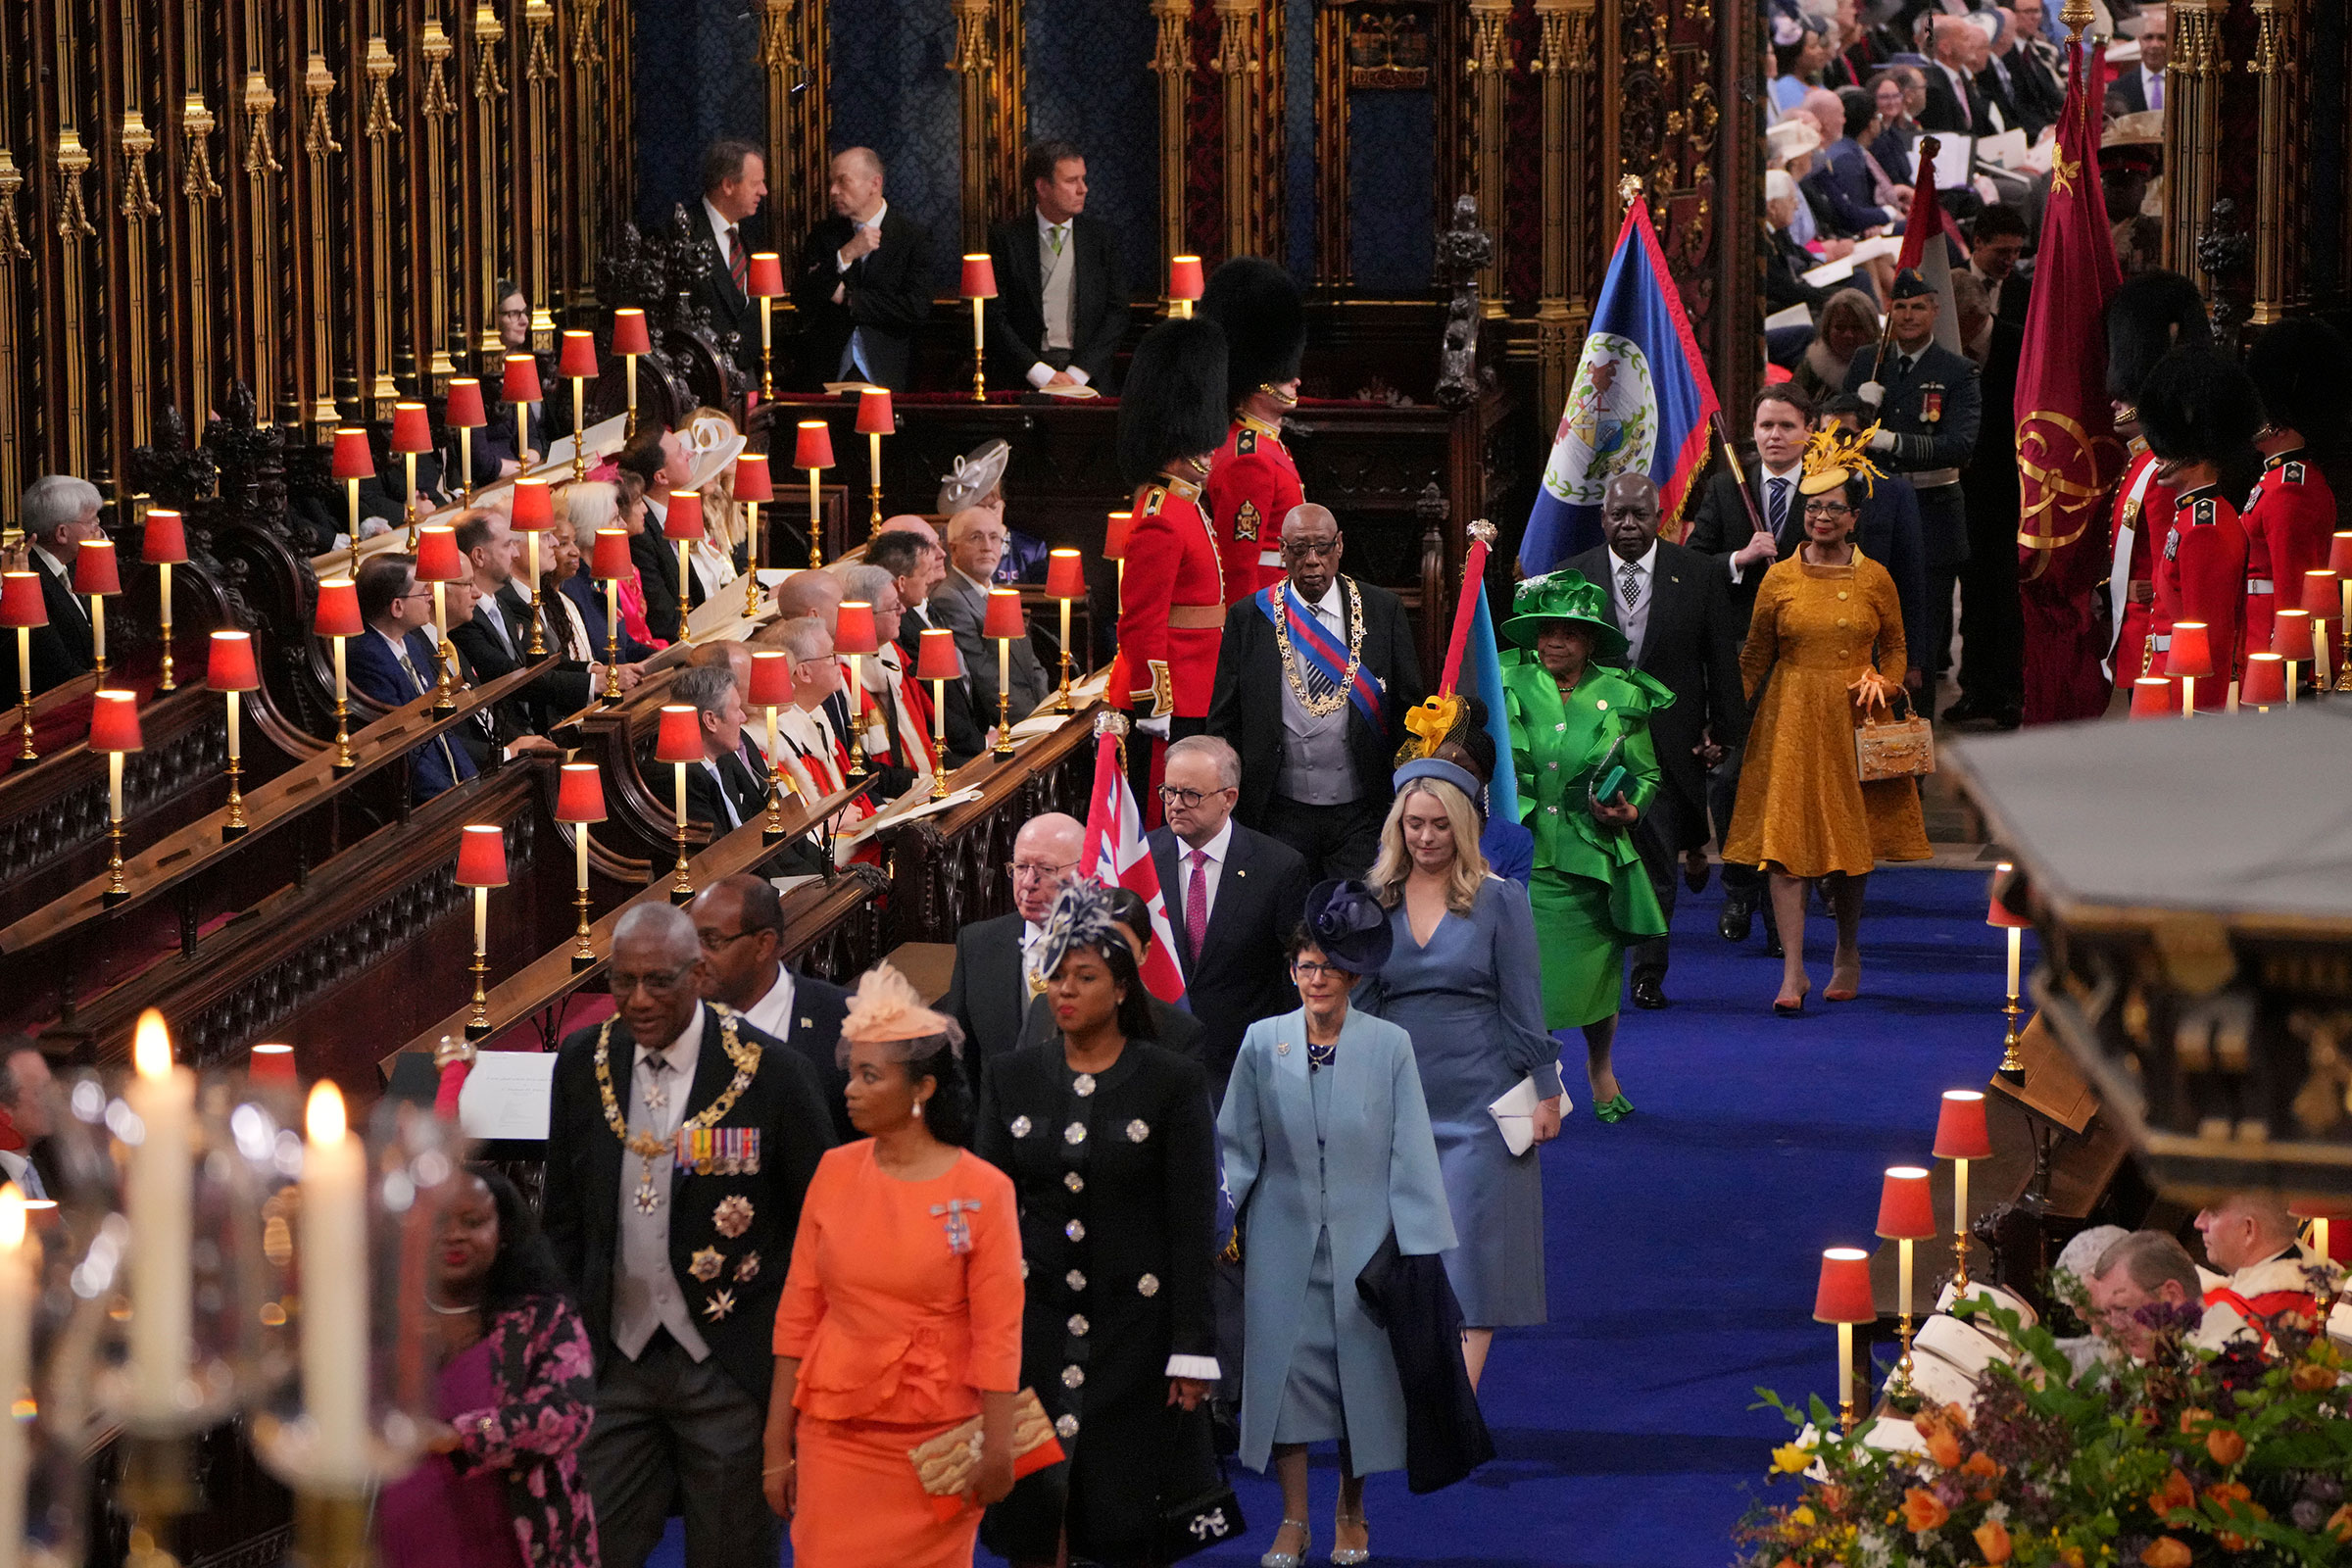 Representatives of the Commonwealth realms at the coronation ceremony. (Aaron Chown—PA Wire/AP)